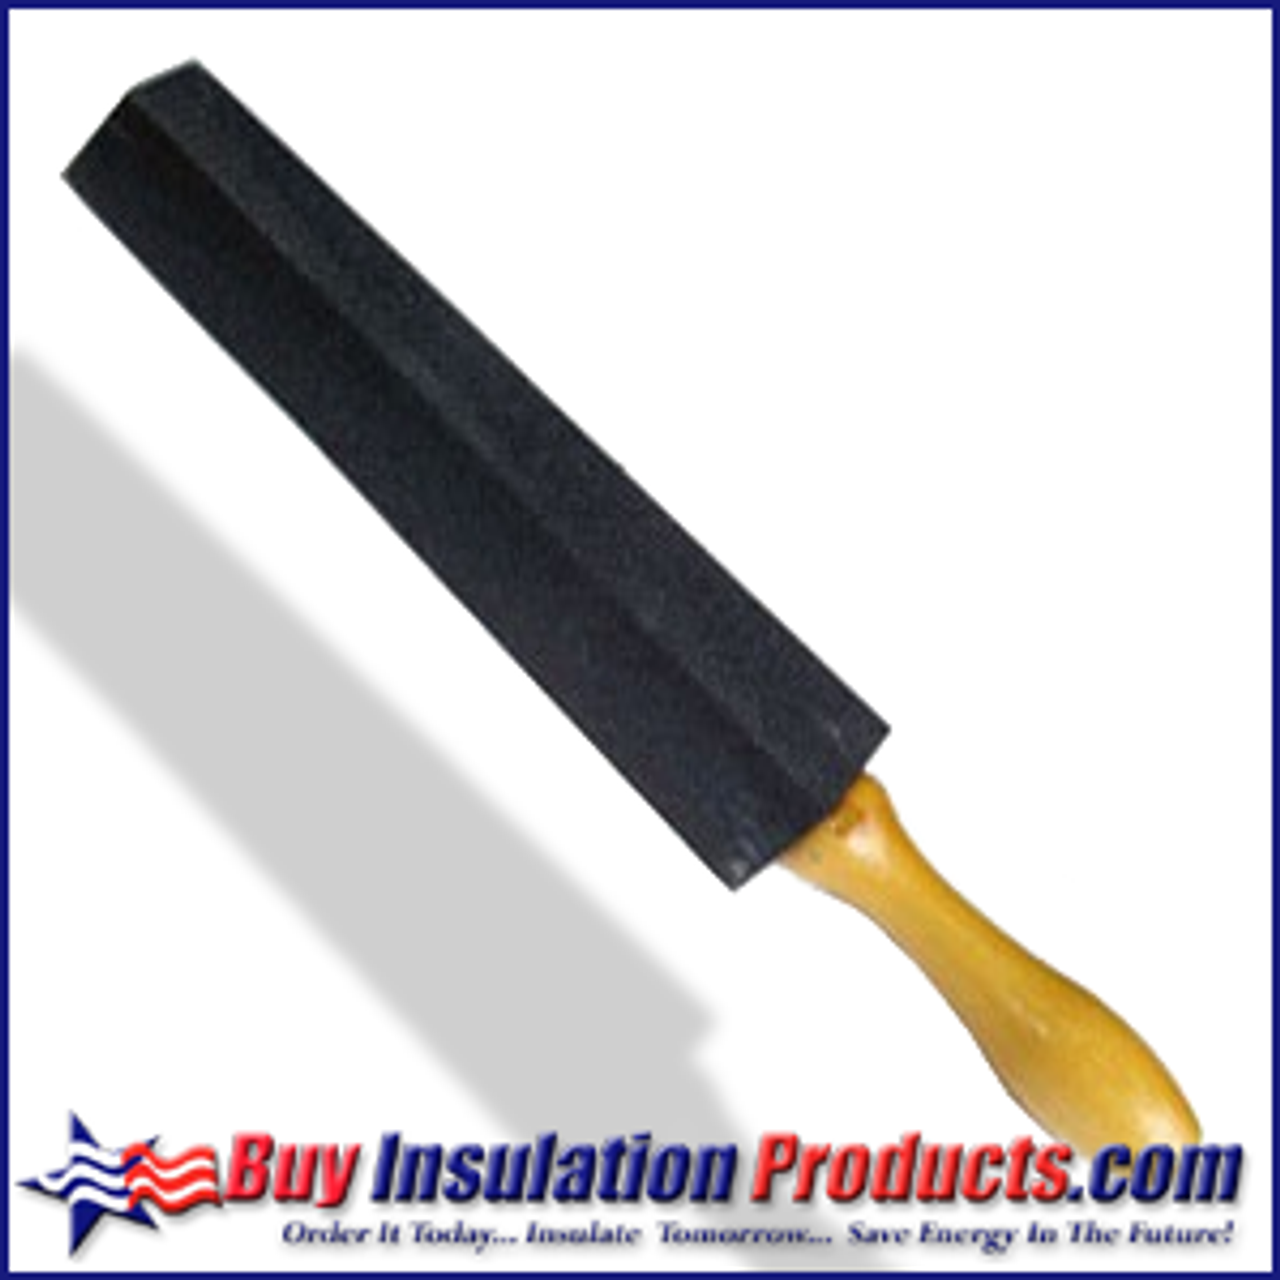 High quality Silicon Carbide Knife Sharpening Wheel